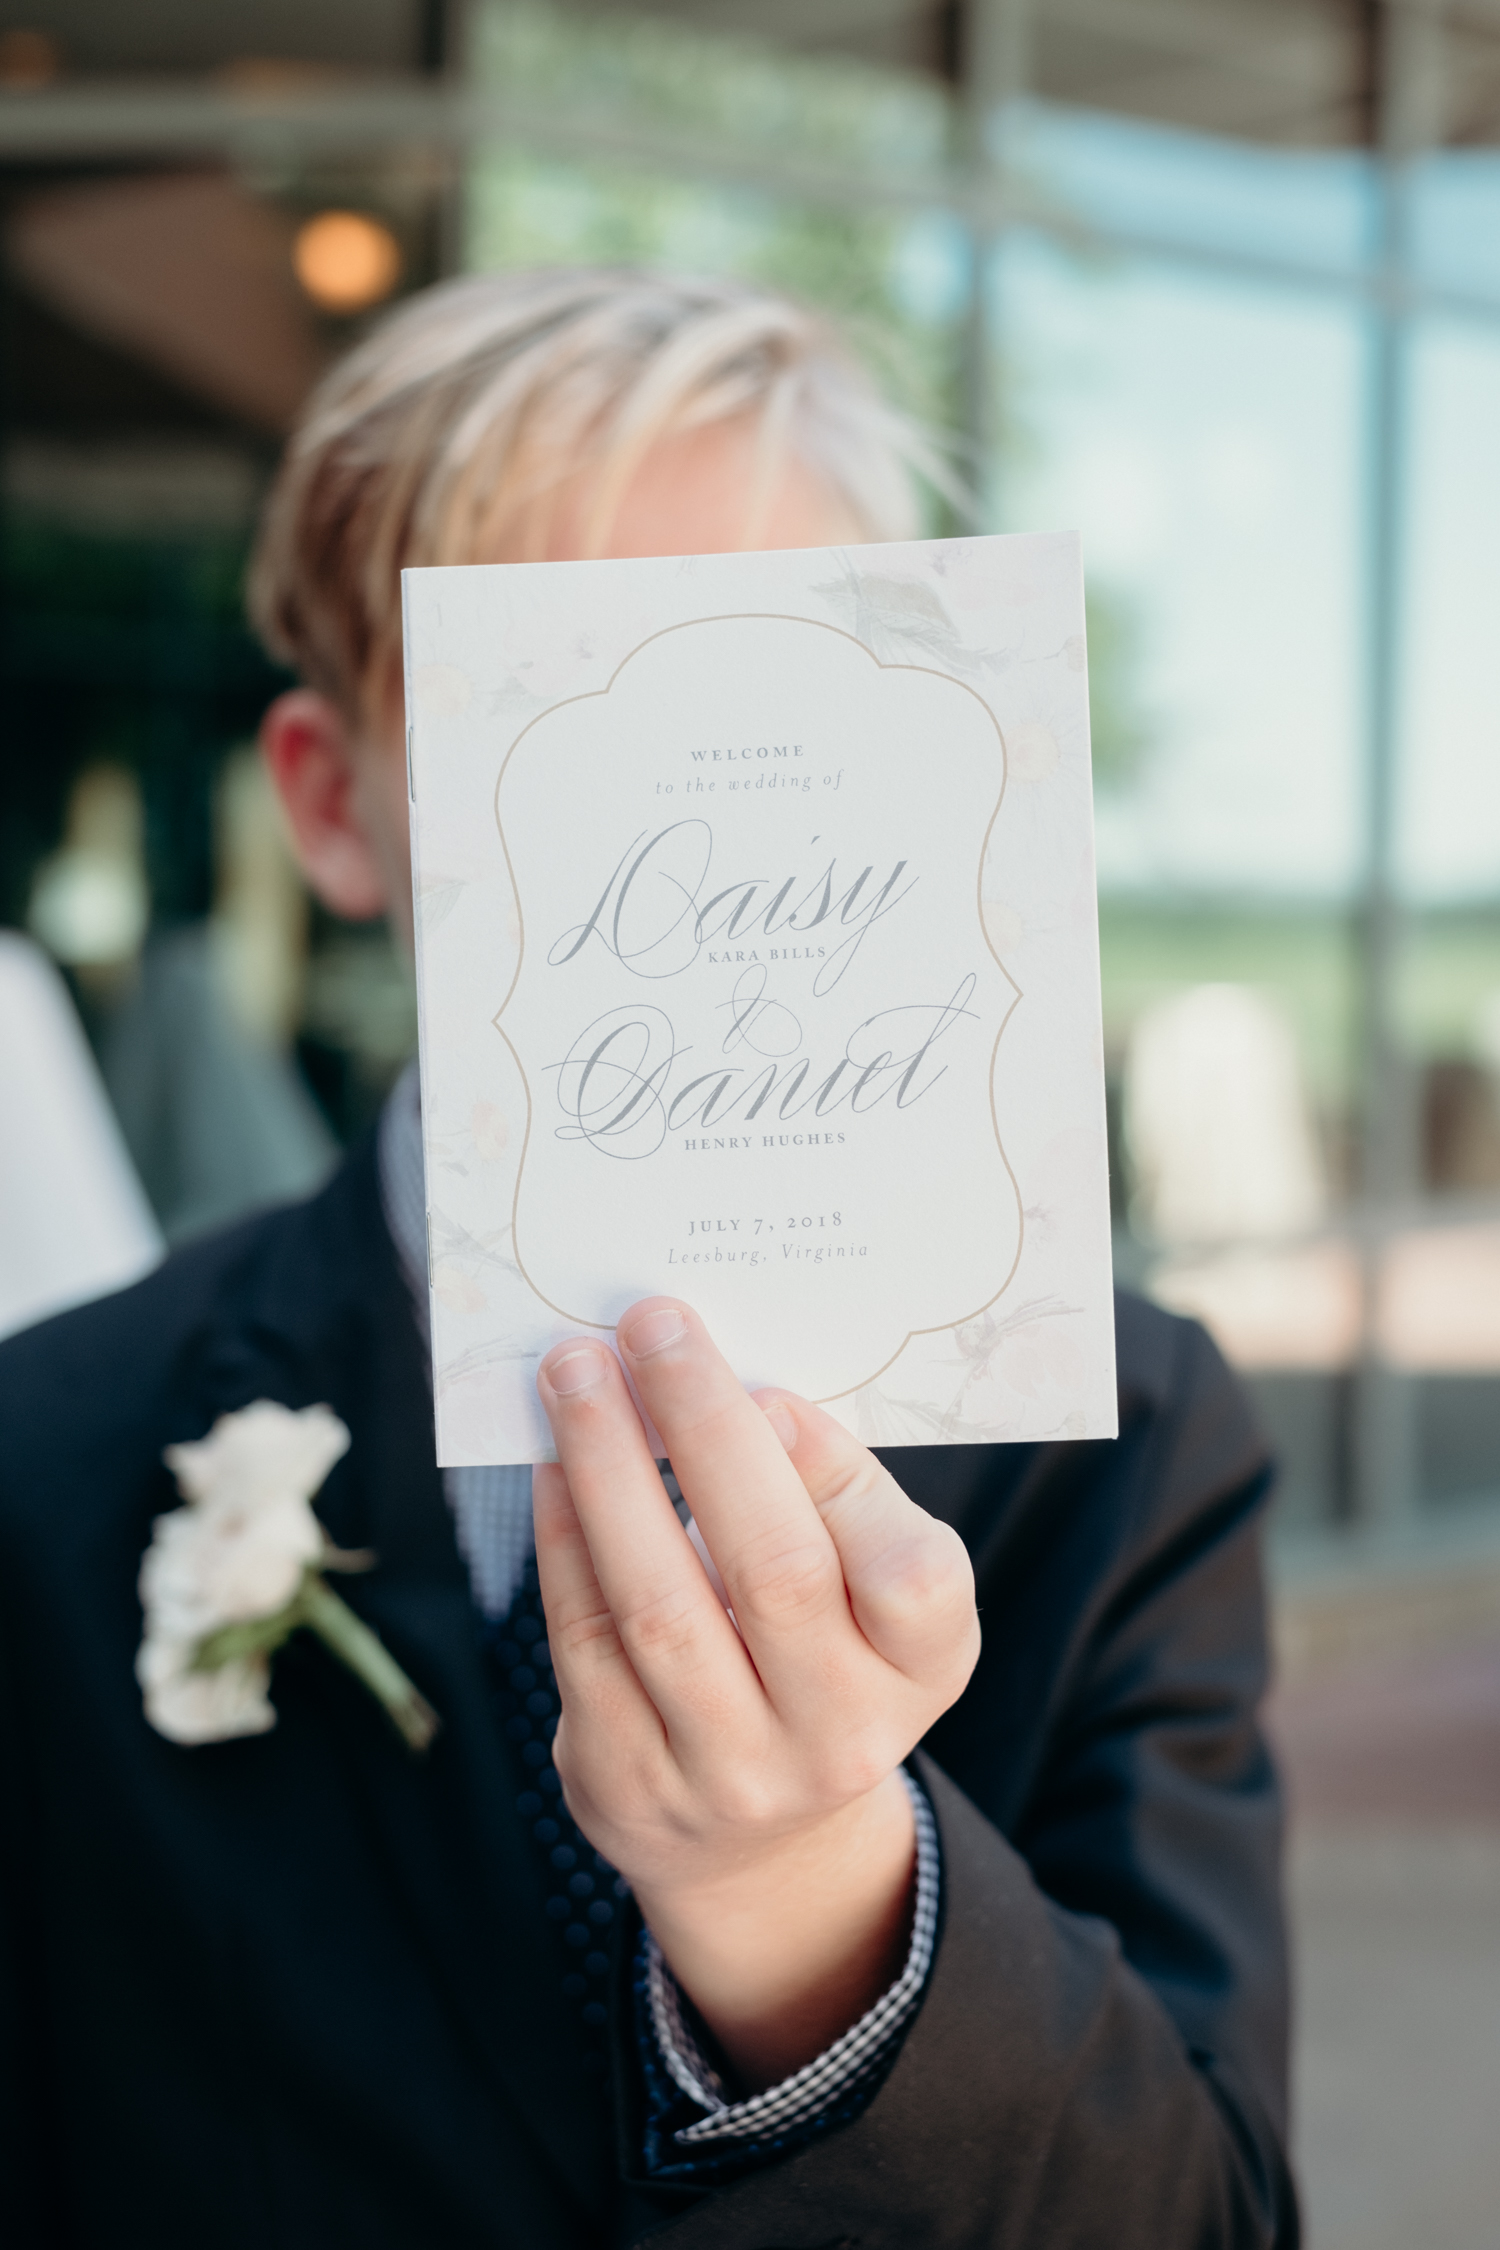 A boy holds up the program for a wedding ceremony at Lansdowne Resort.